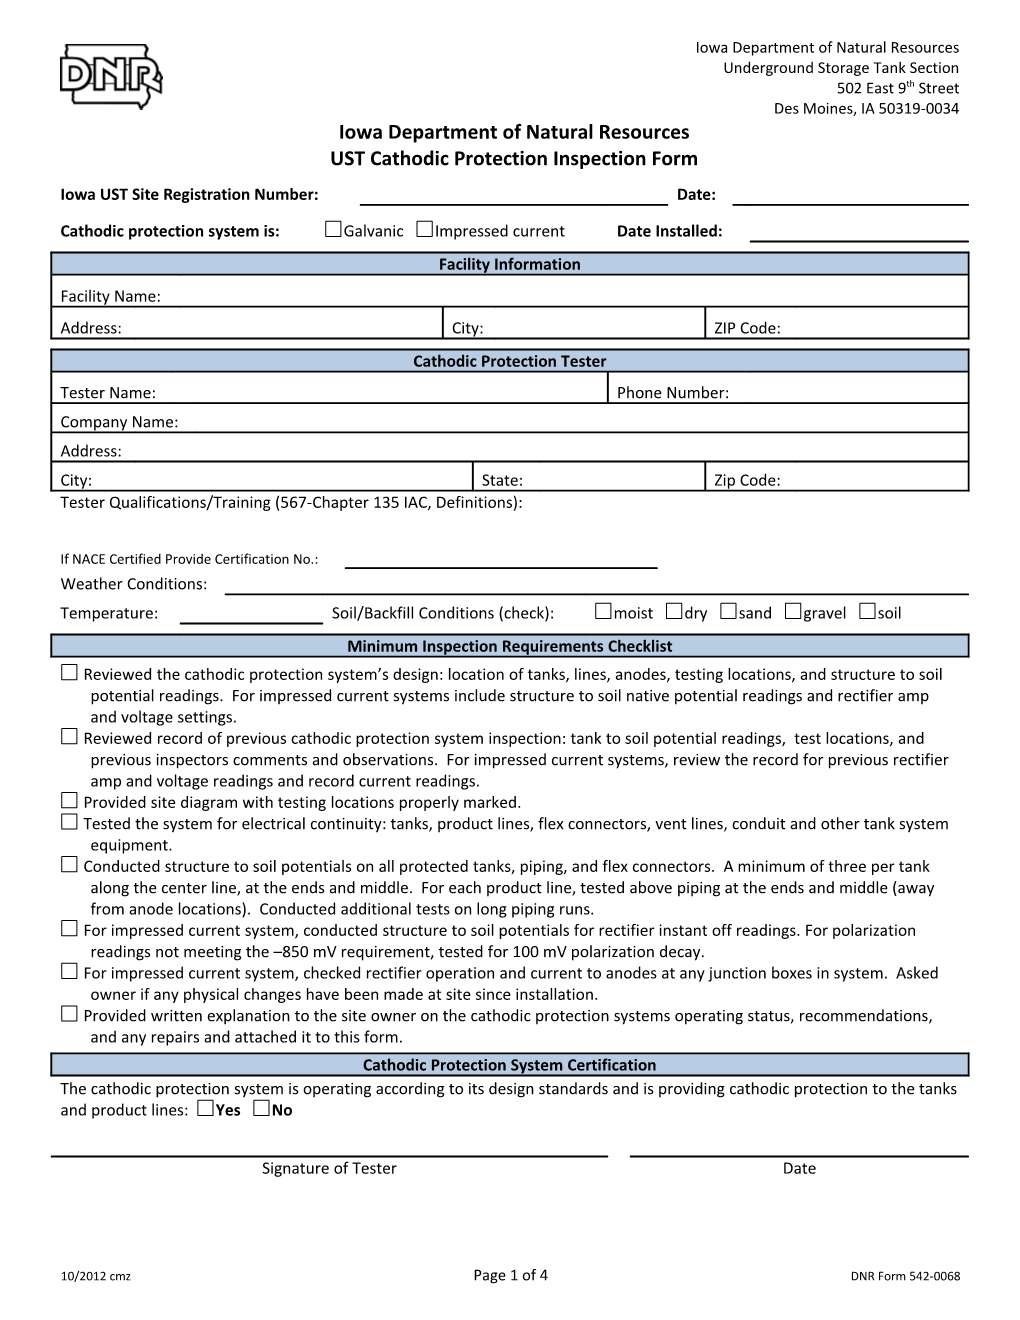 UST Cathodic Protection Inpsection Form